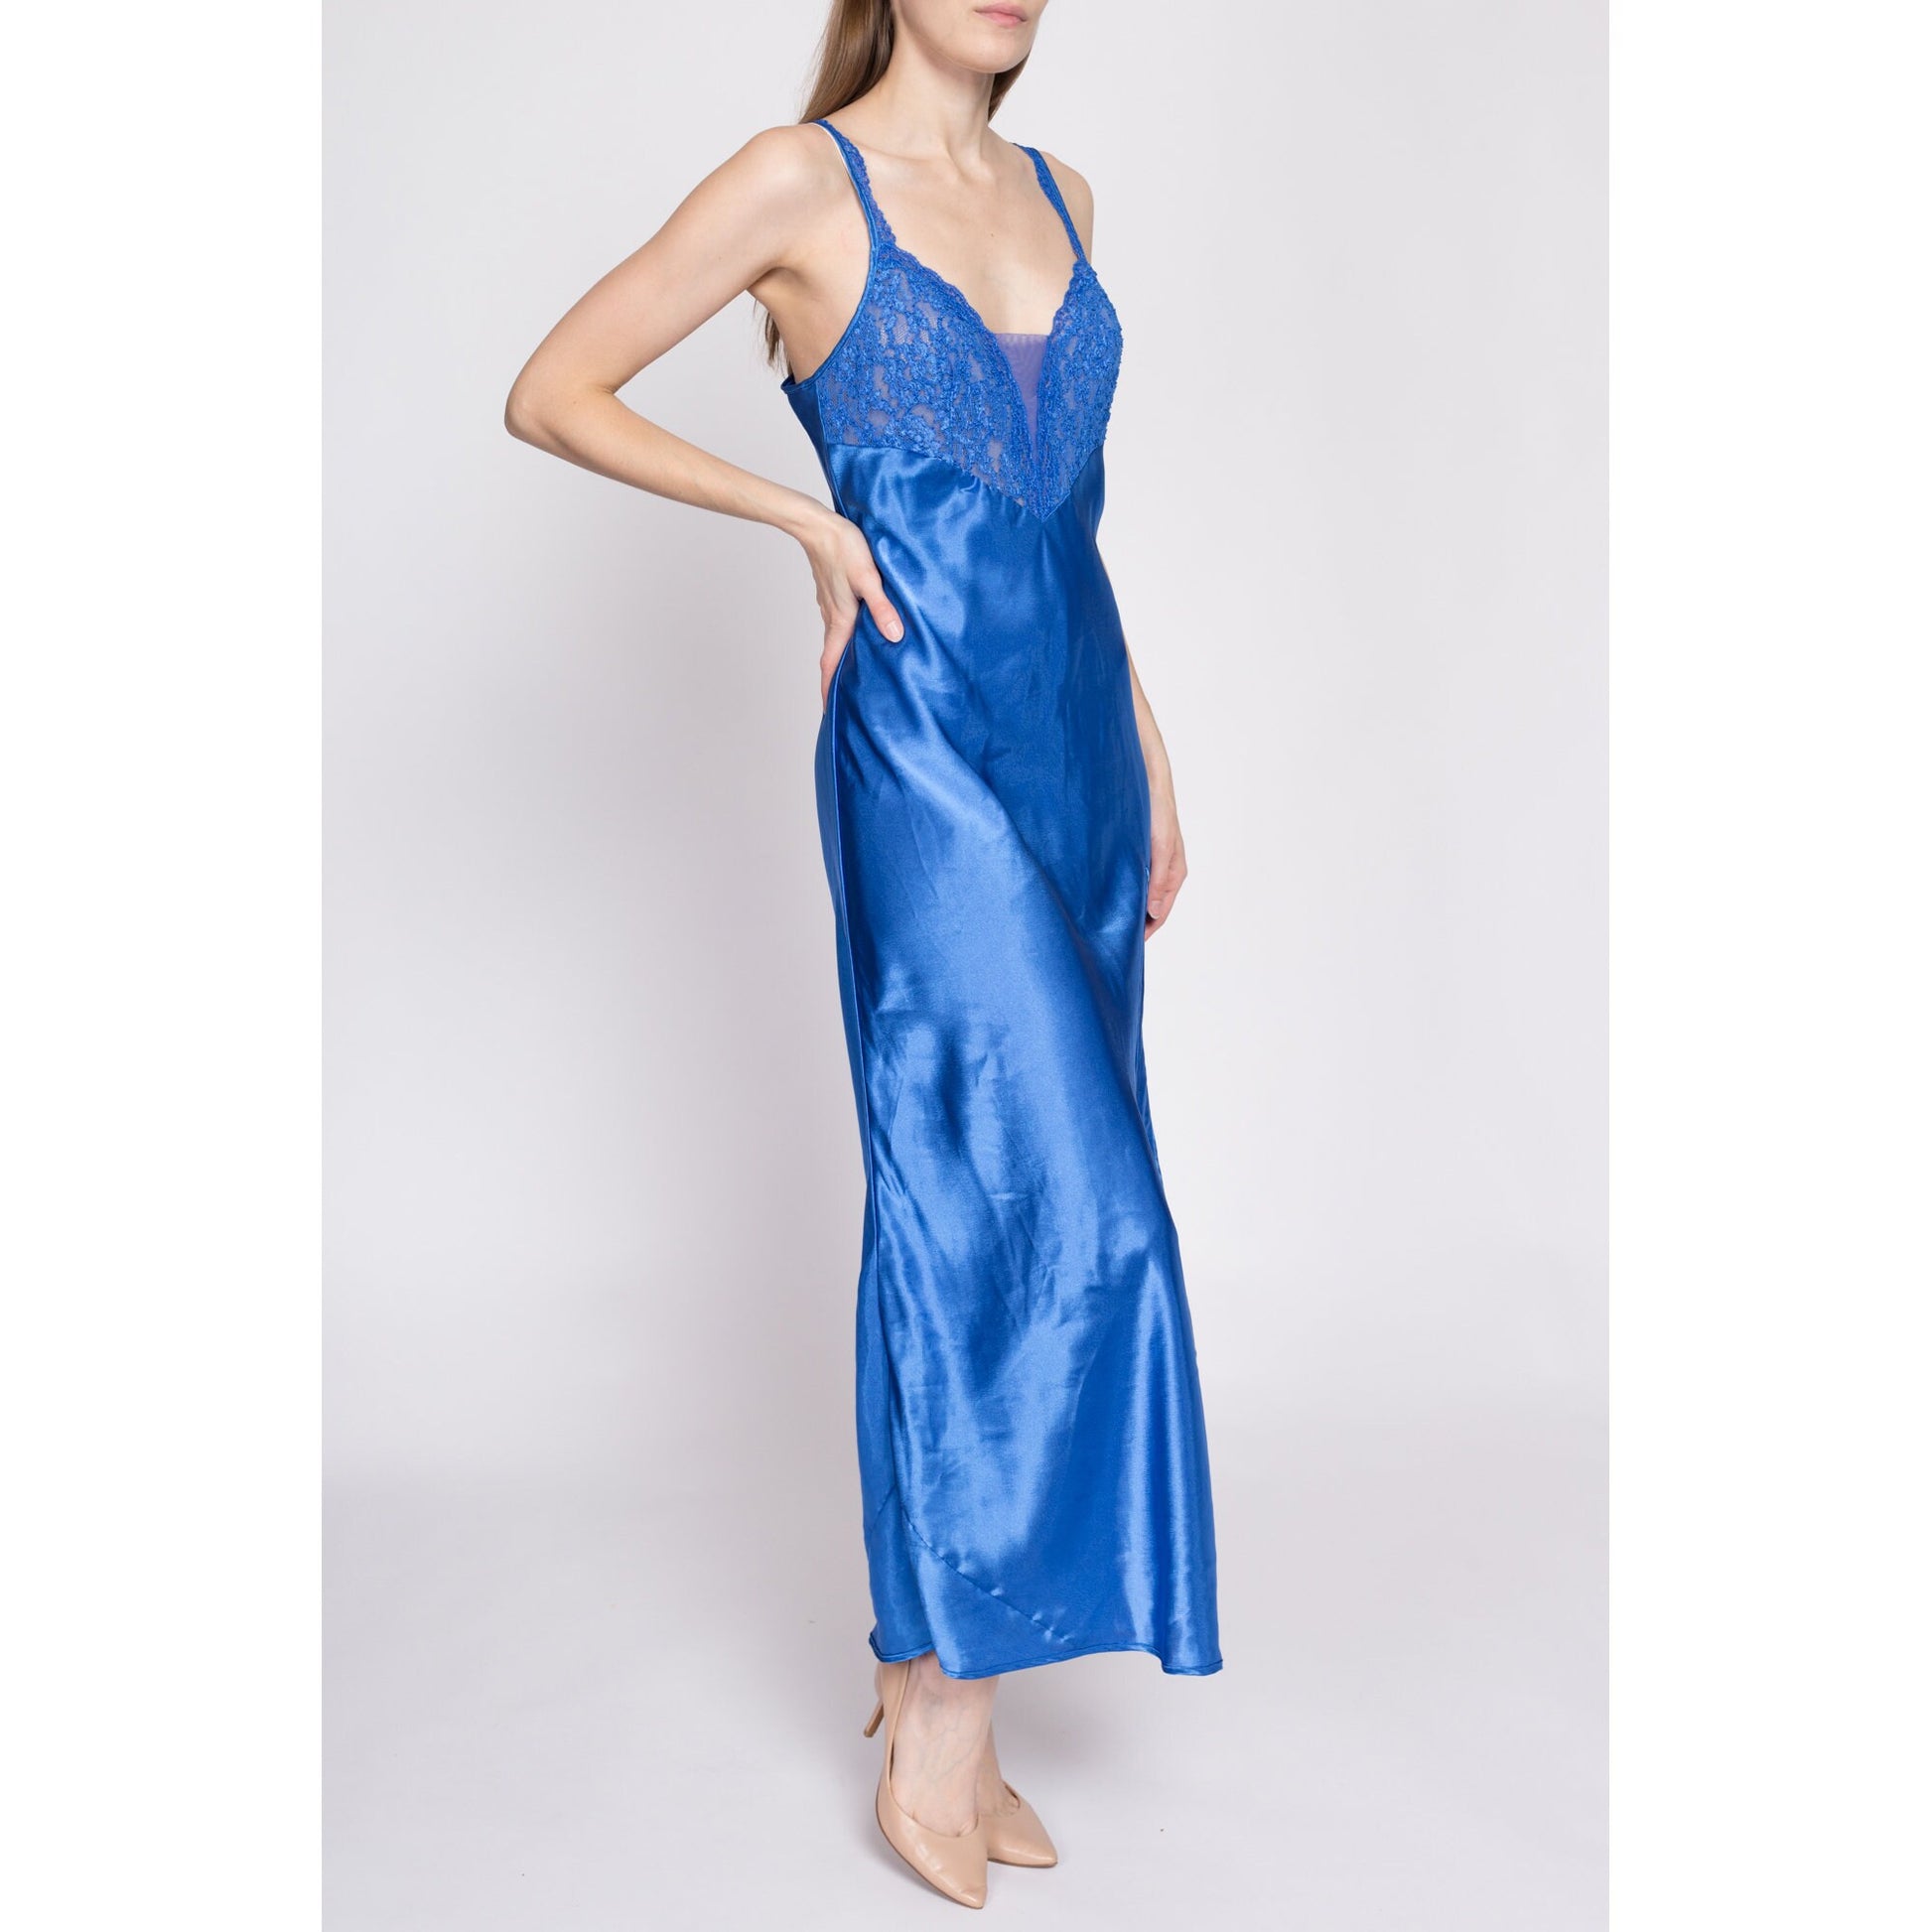 80s Victoria's Secret Blue Satin Nightgown - Small – Flying Apple